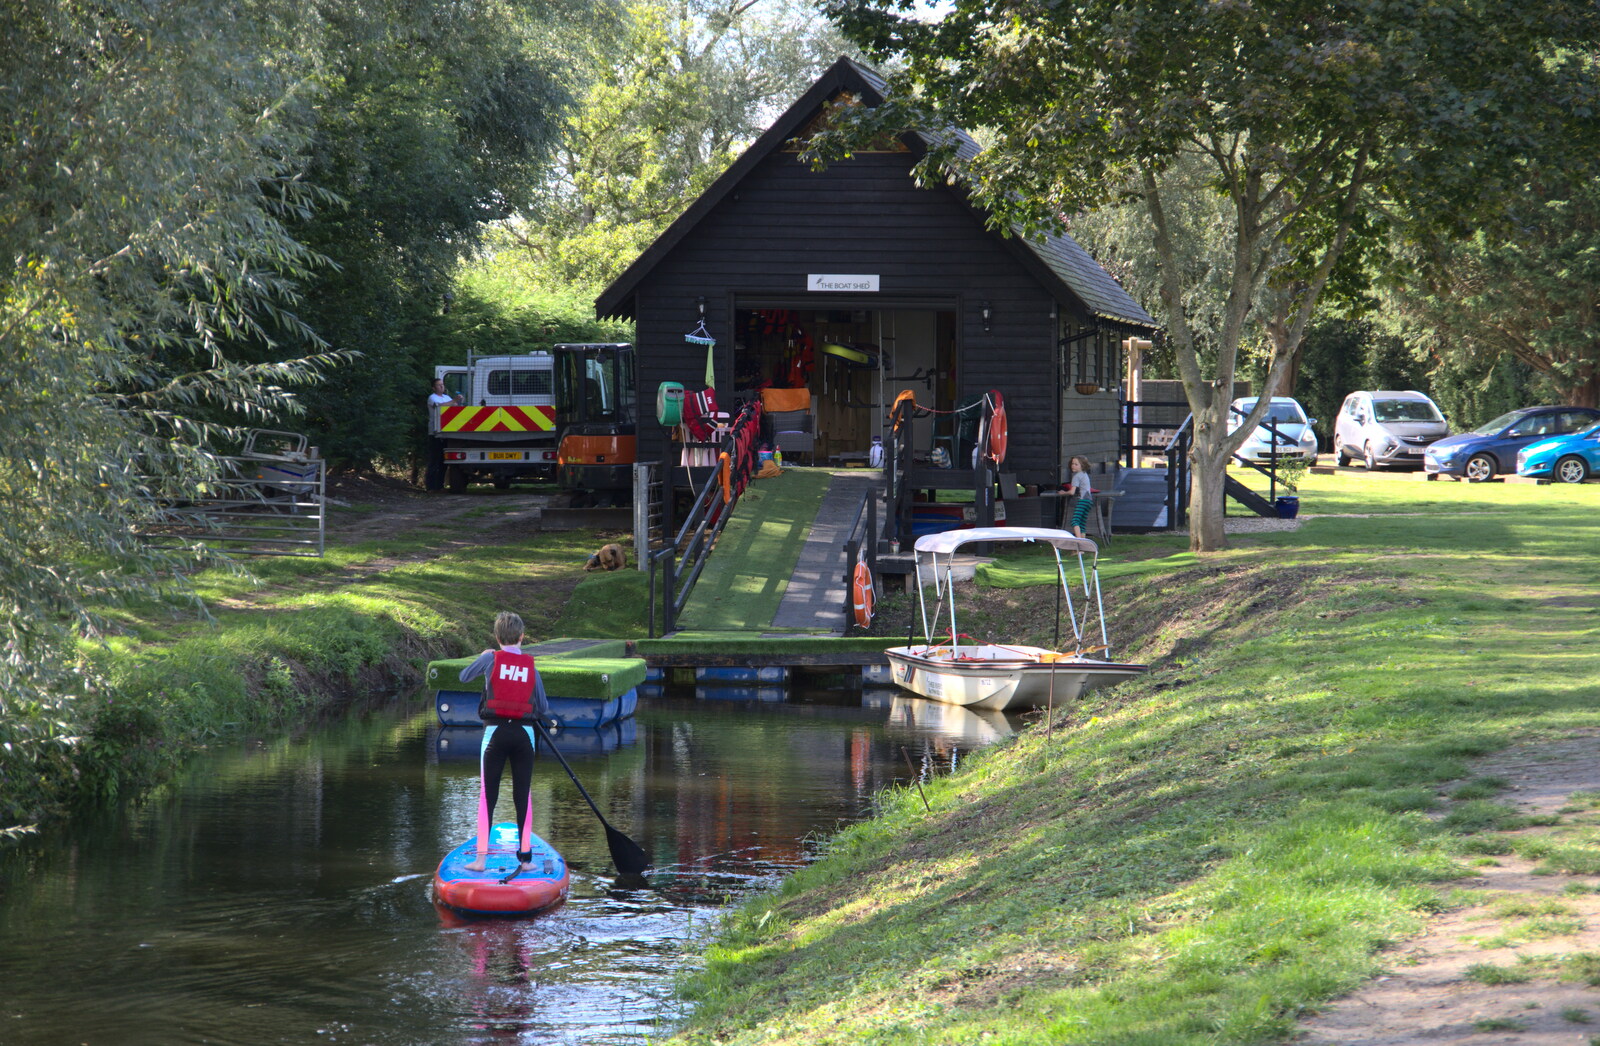 Camping at Three Rivers, Geldeston, Norfolk - 5th September 2020: Lydia heads up to the boat shed